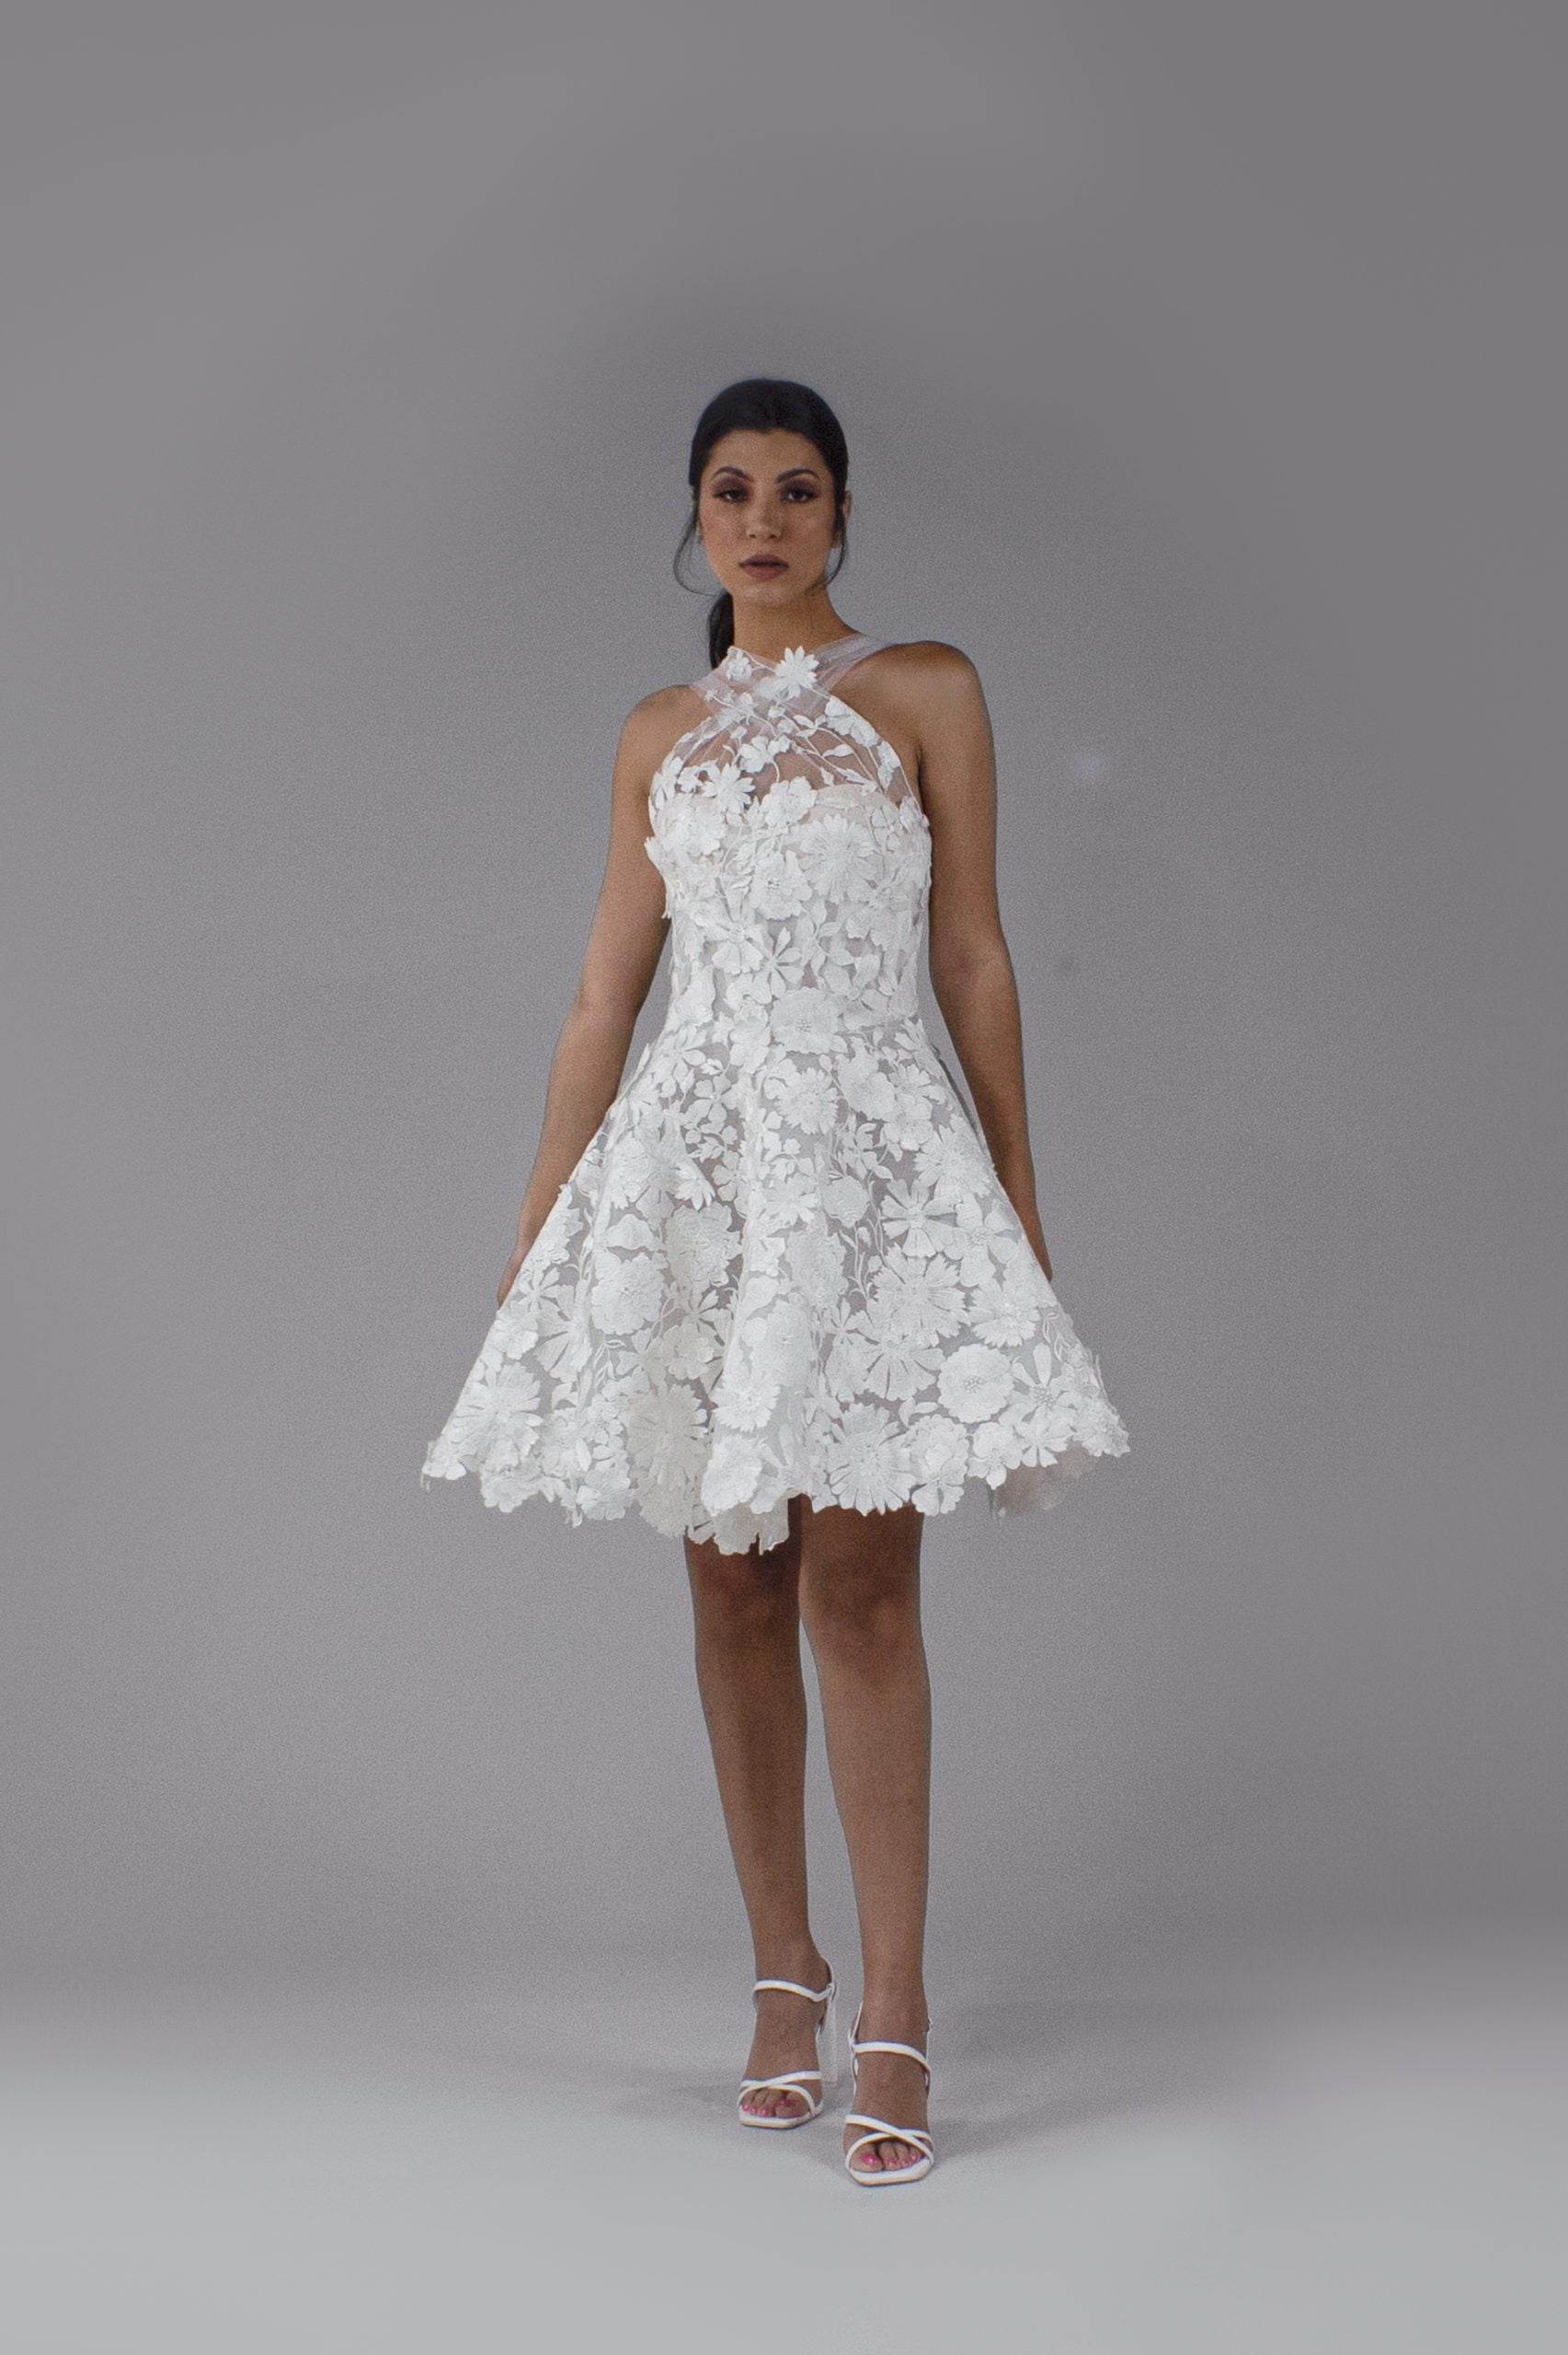 Romantic And Trendy A-line Halter Gown With A Natural Waist And Detachable Skirt by Nadia Manjarrez - Image 3